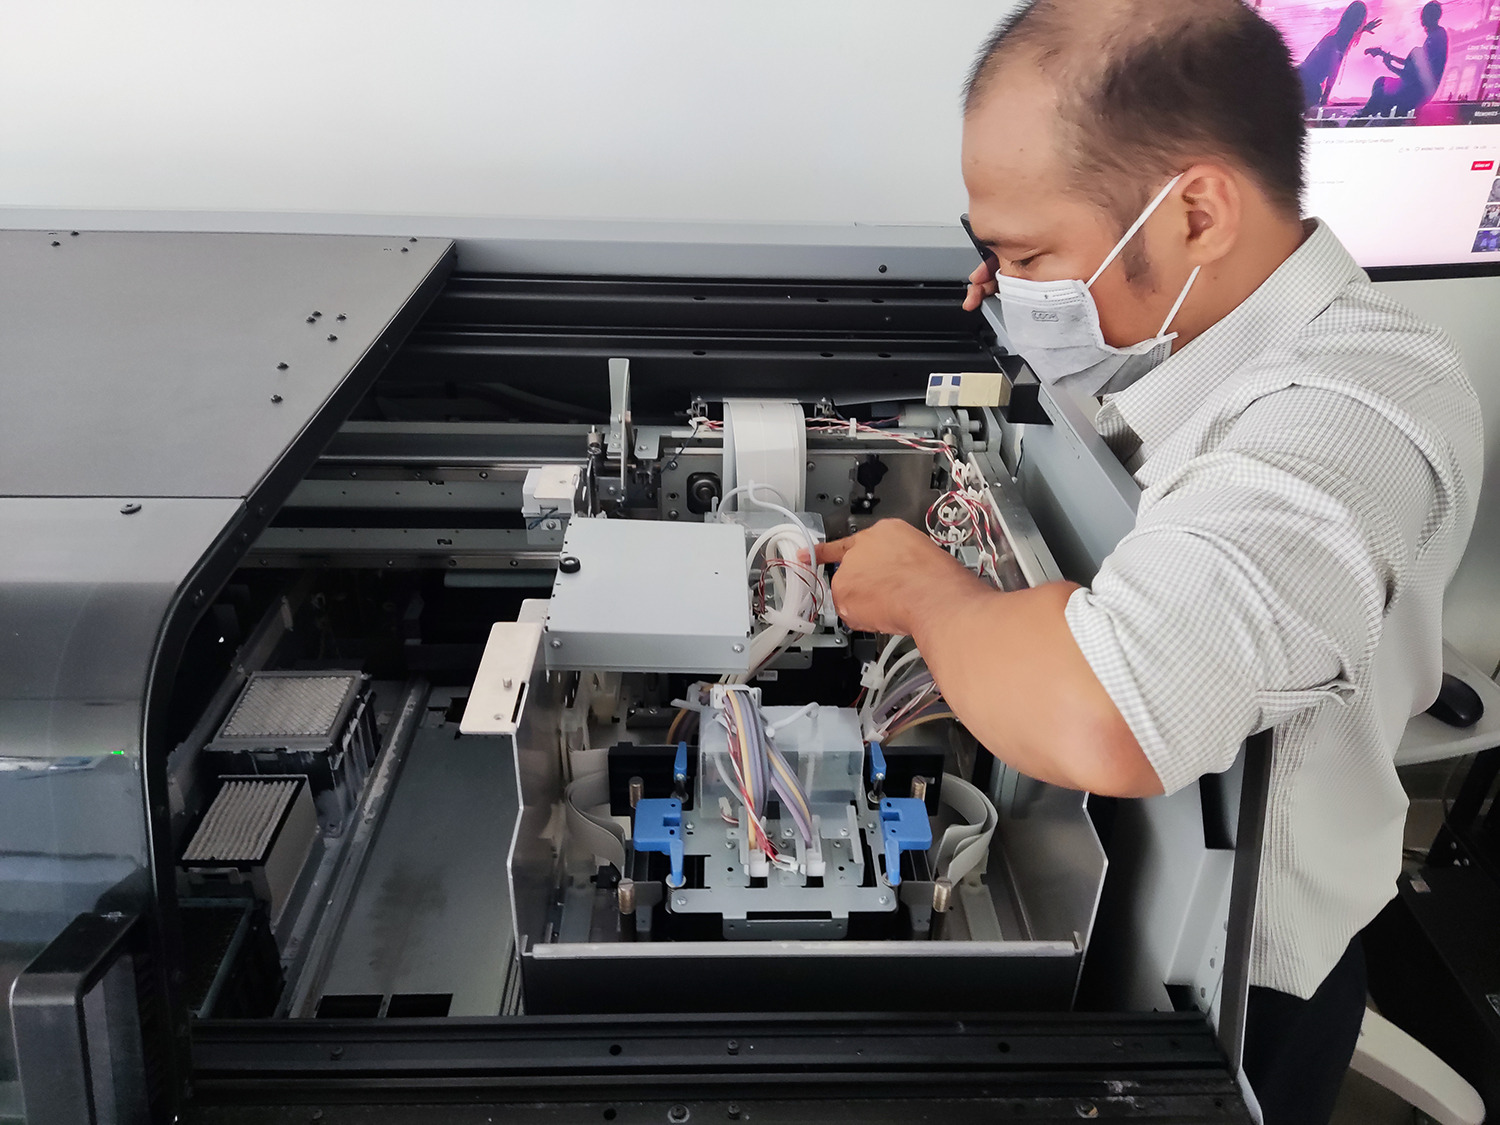 Technical considerations for large scale DTG printing